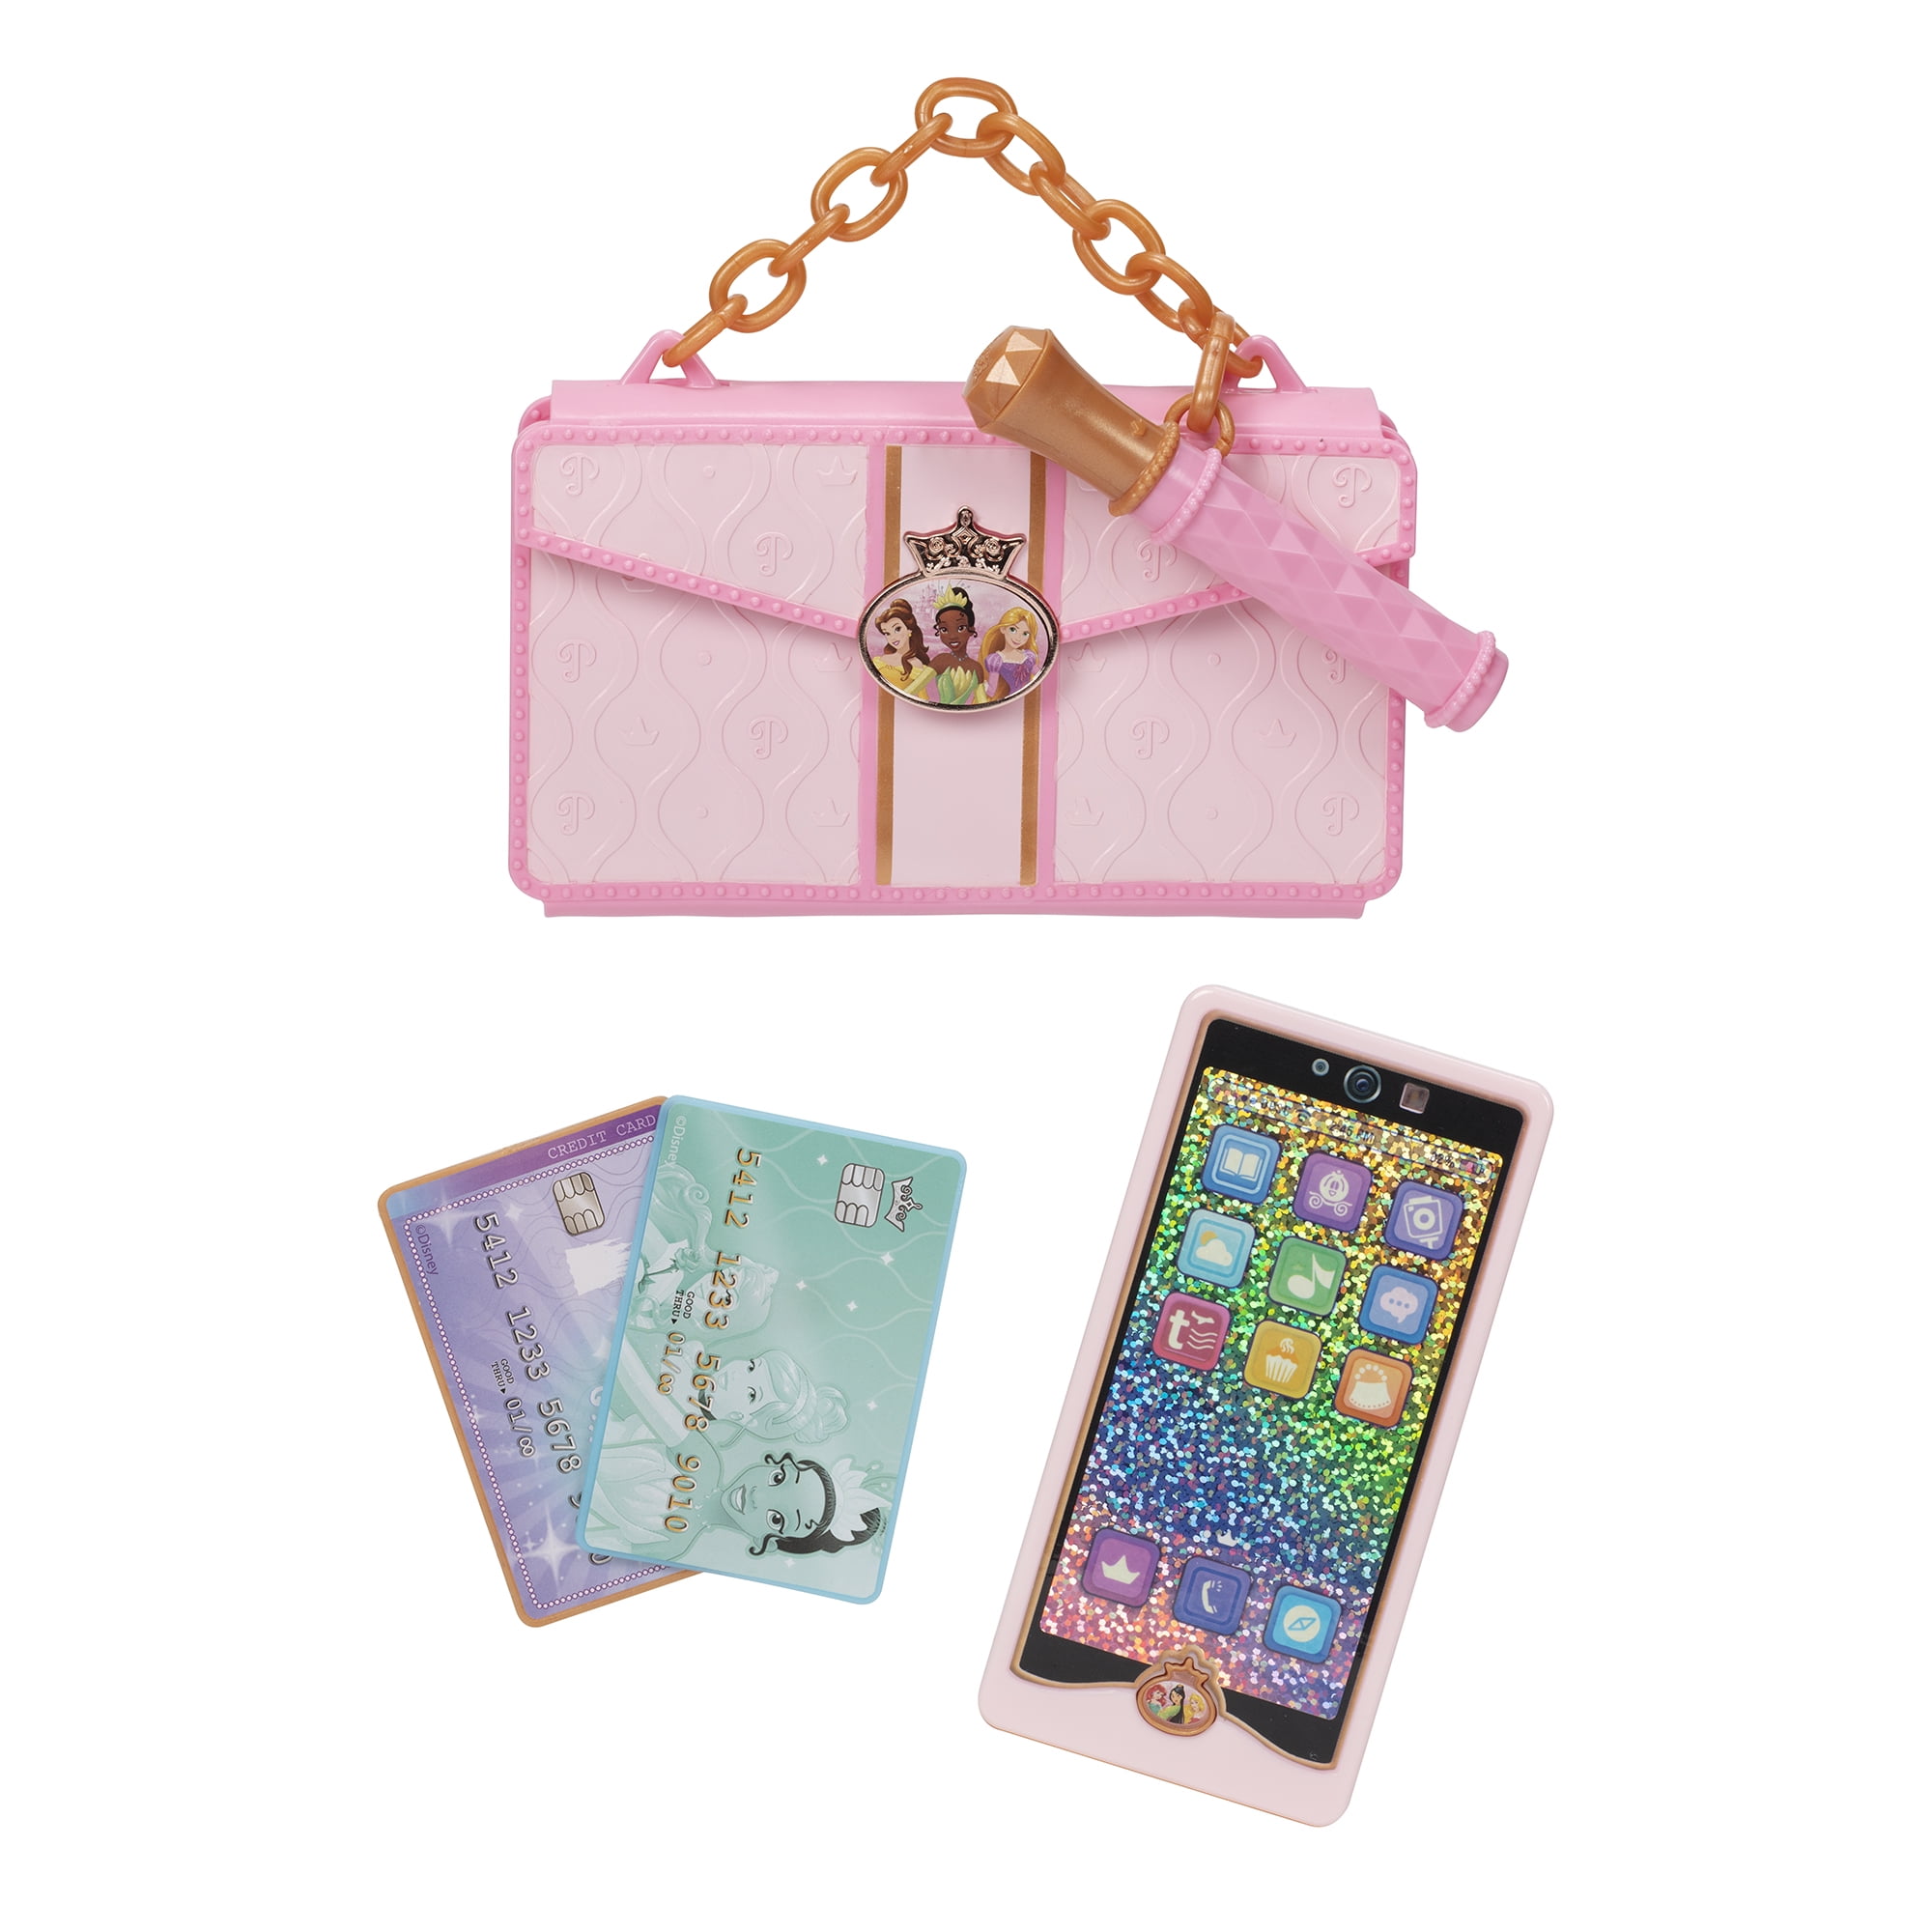 coming soon Disney Princess Style Collection Play Phone and Stylish Clutch with Handle and Mirror